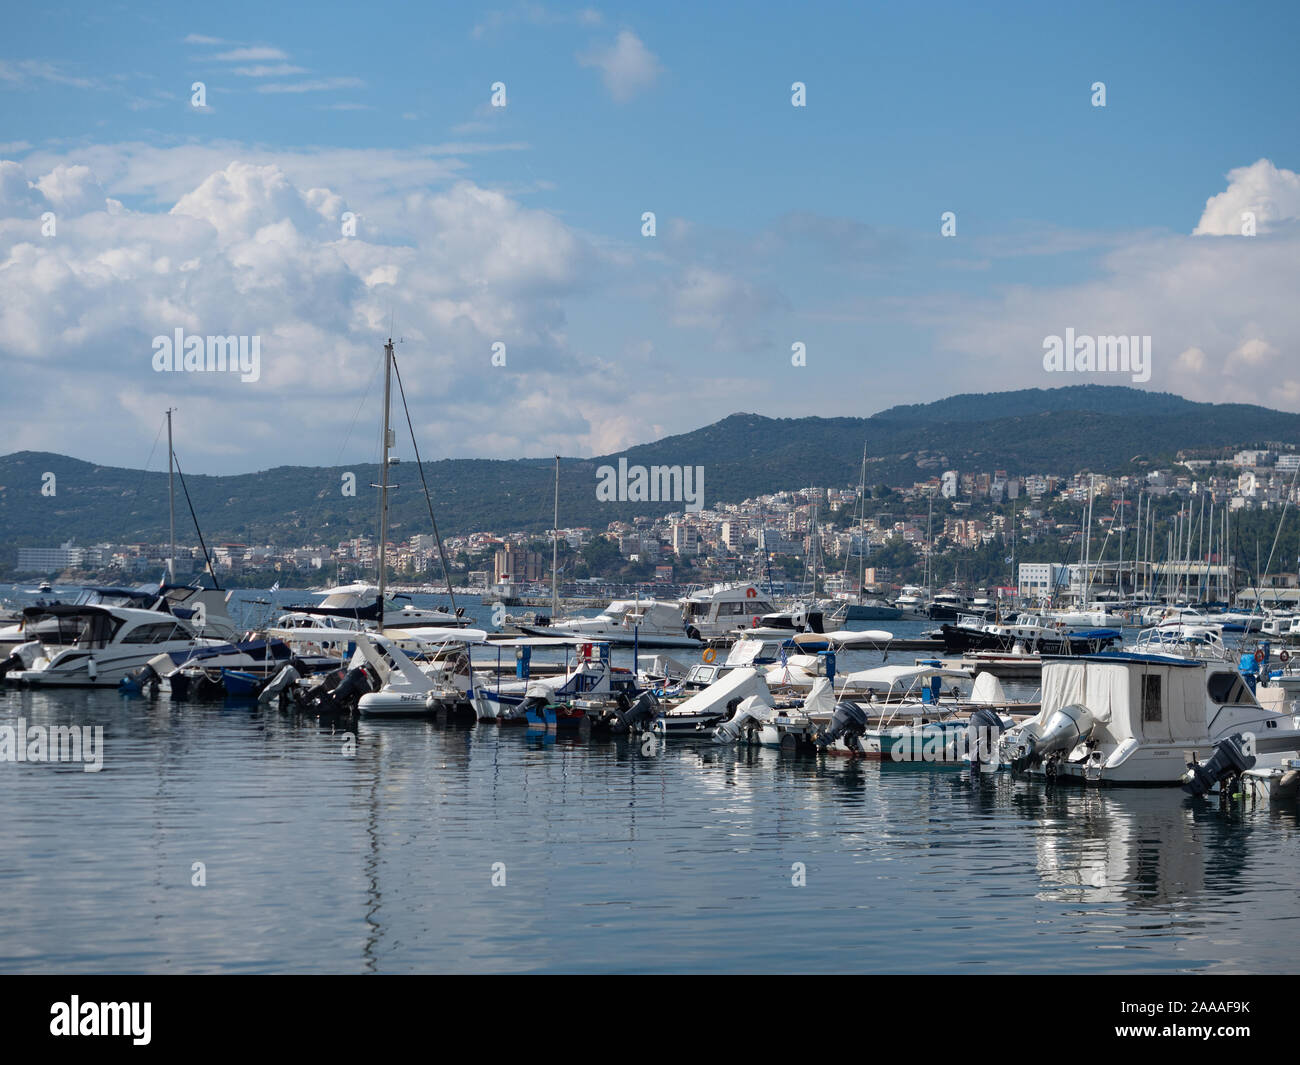 Bay of Kavala in the Aegean Sea with rows of powerboats and sailboats docked in the harbor and the city of Kavala and mountains in the background Stock Photo